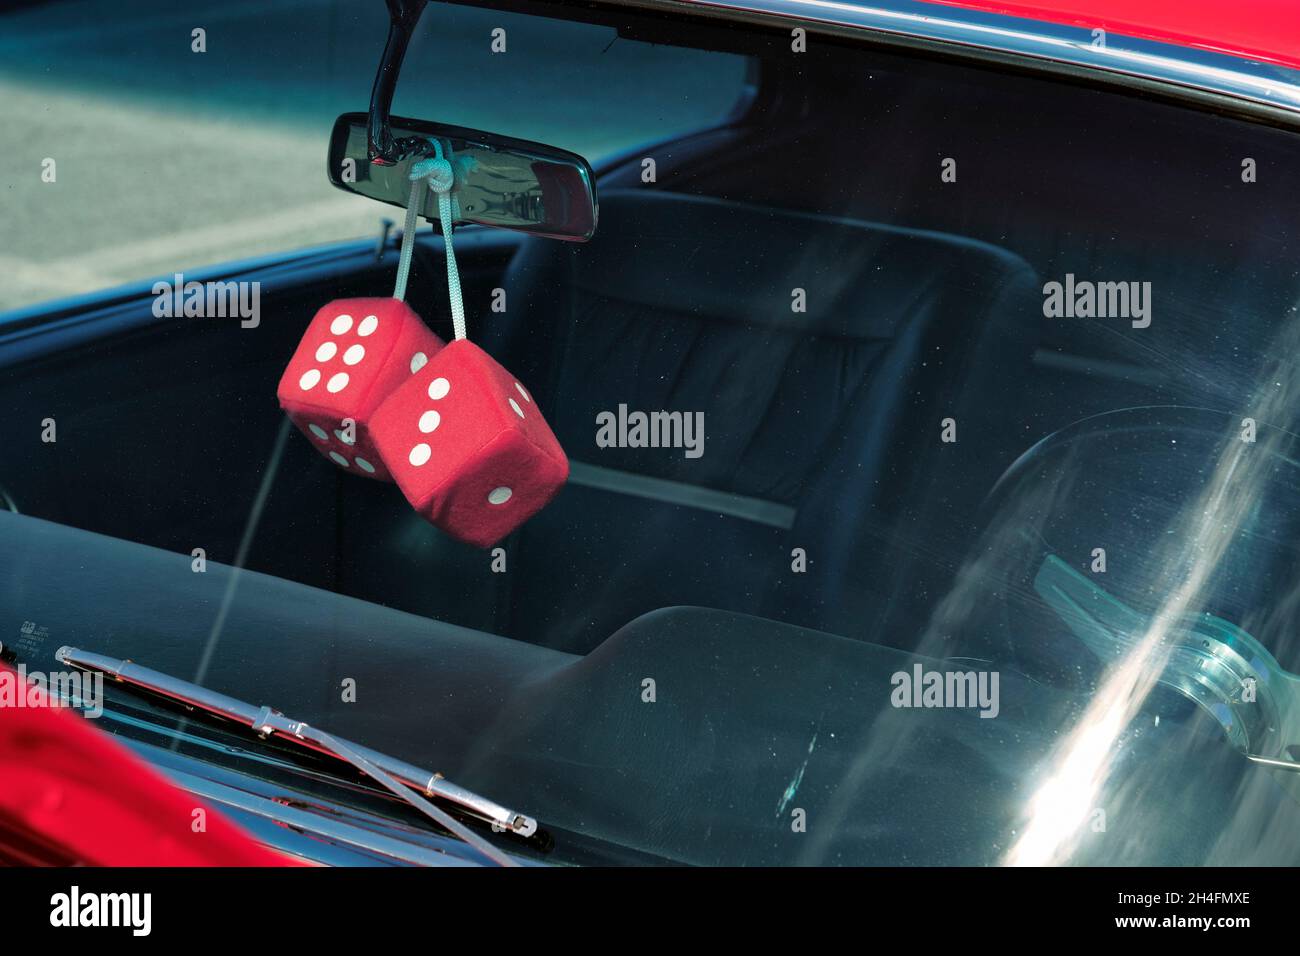 Custom car interior with large dice hanging on mirror is displayed at the 2021 Endless Summer Cruisin in Ocean City Maryland. Stock Photo